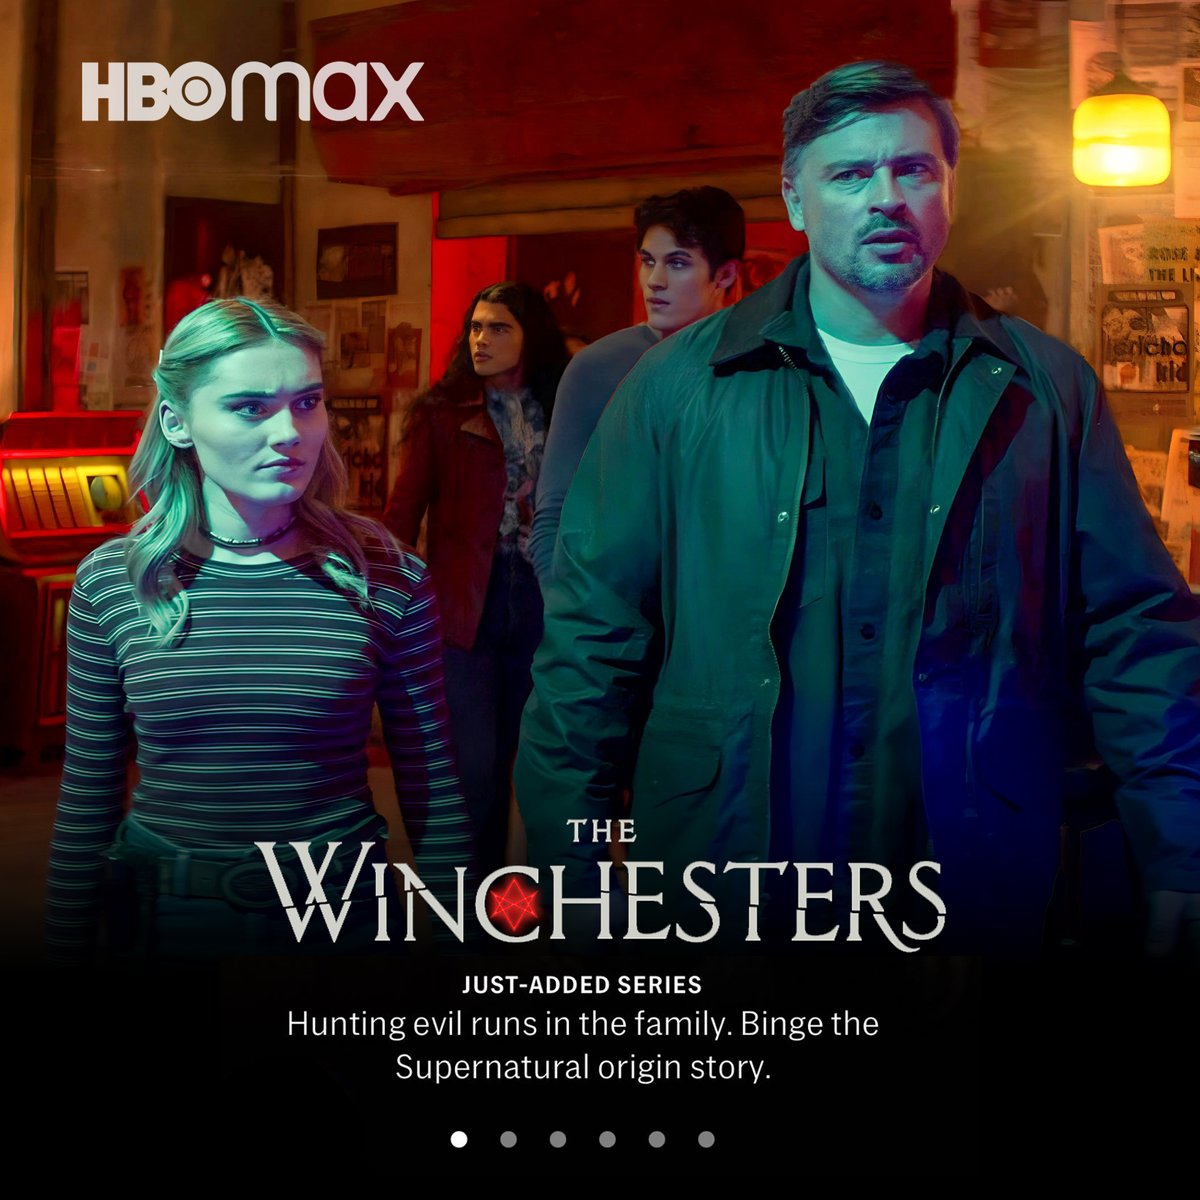 Catch Tom Welling on THE WINCHESTERS! Season 1 is streaming on HBO Max (US) now! 📺

#Smallville #TheWinchesters #SupernaturalFamily #SPN #SPNFamily #Supernatural #SPNFandom #MegDonelly #TomWelling #JensenAckles